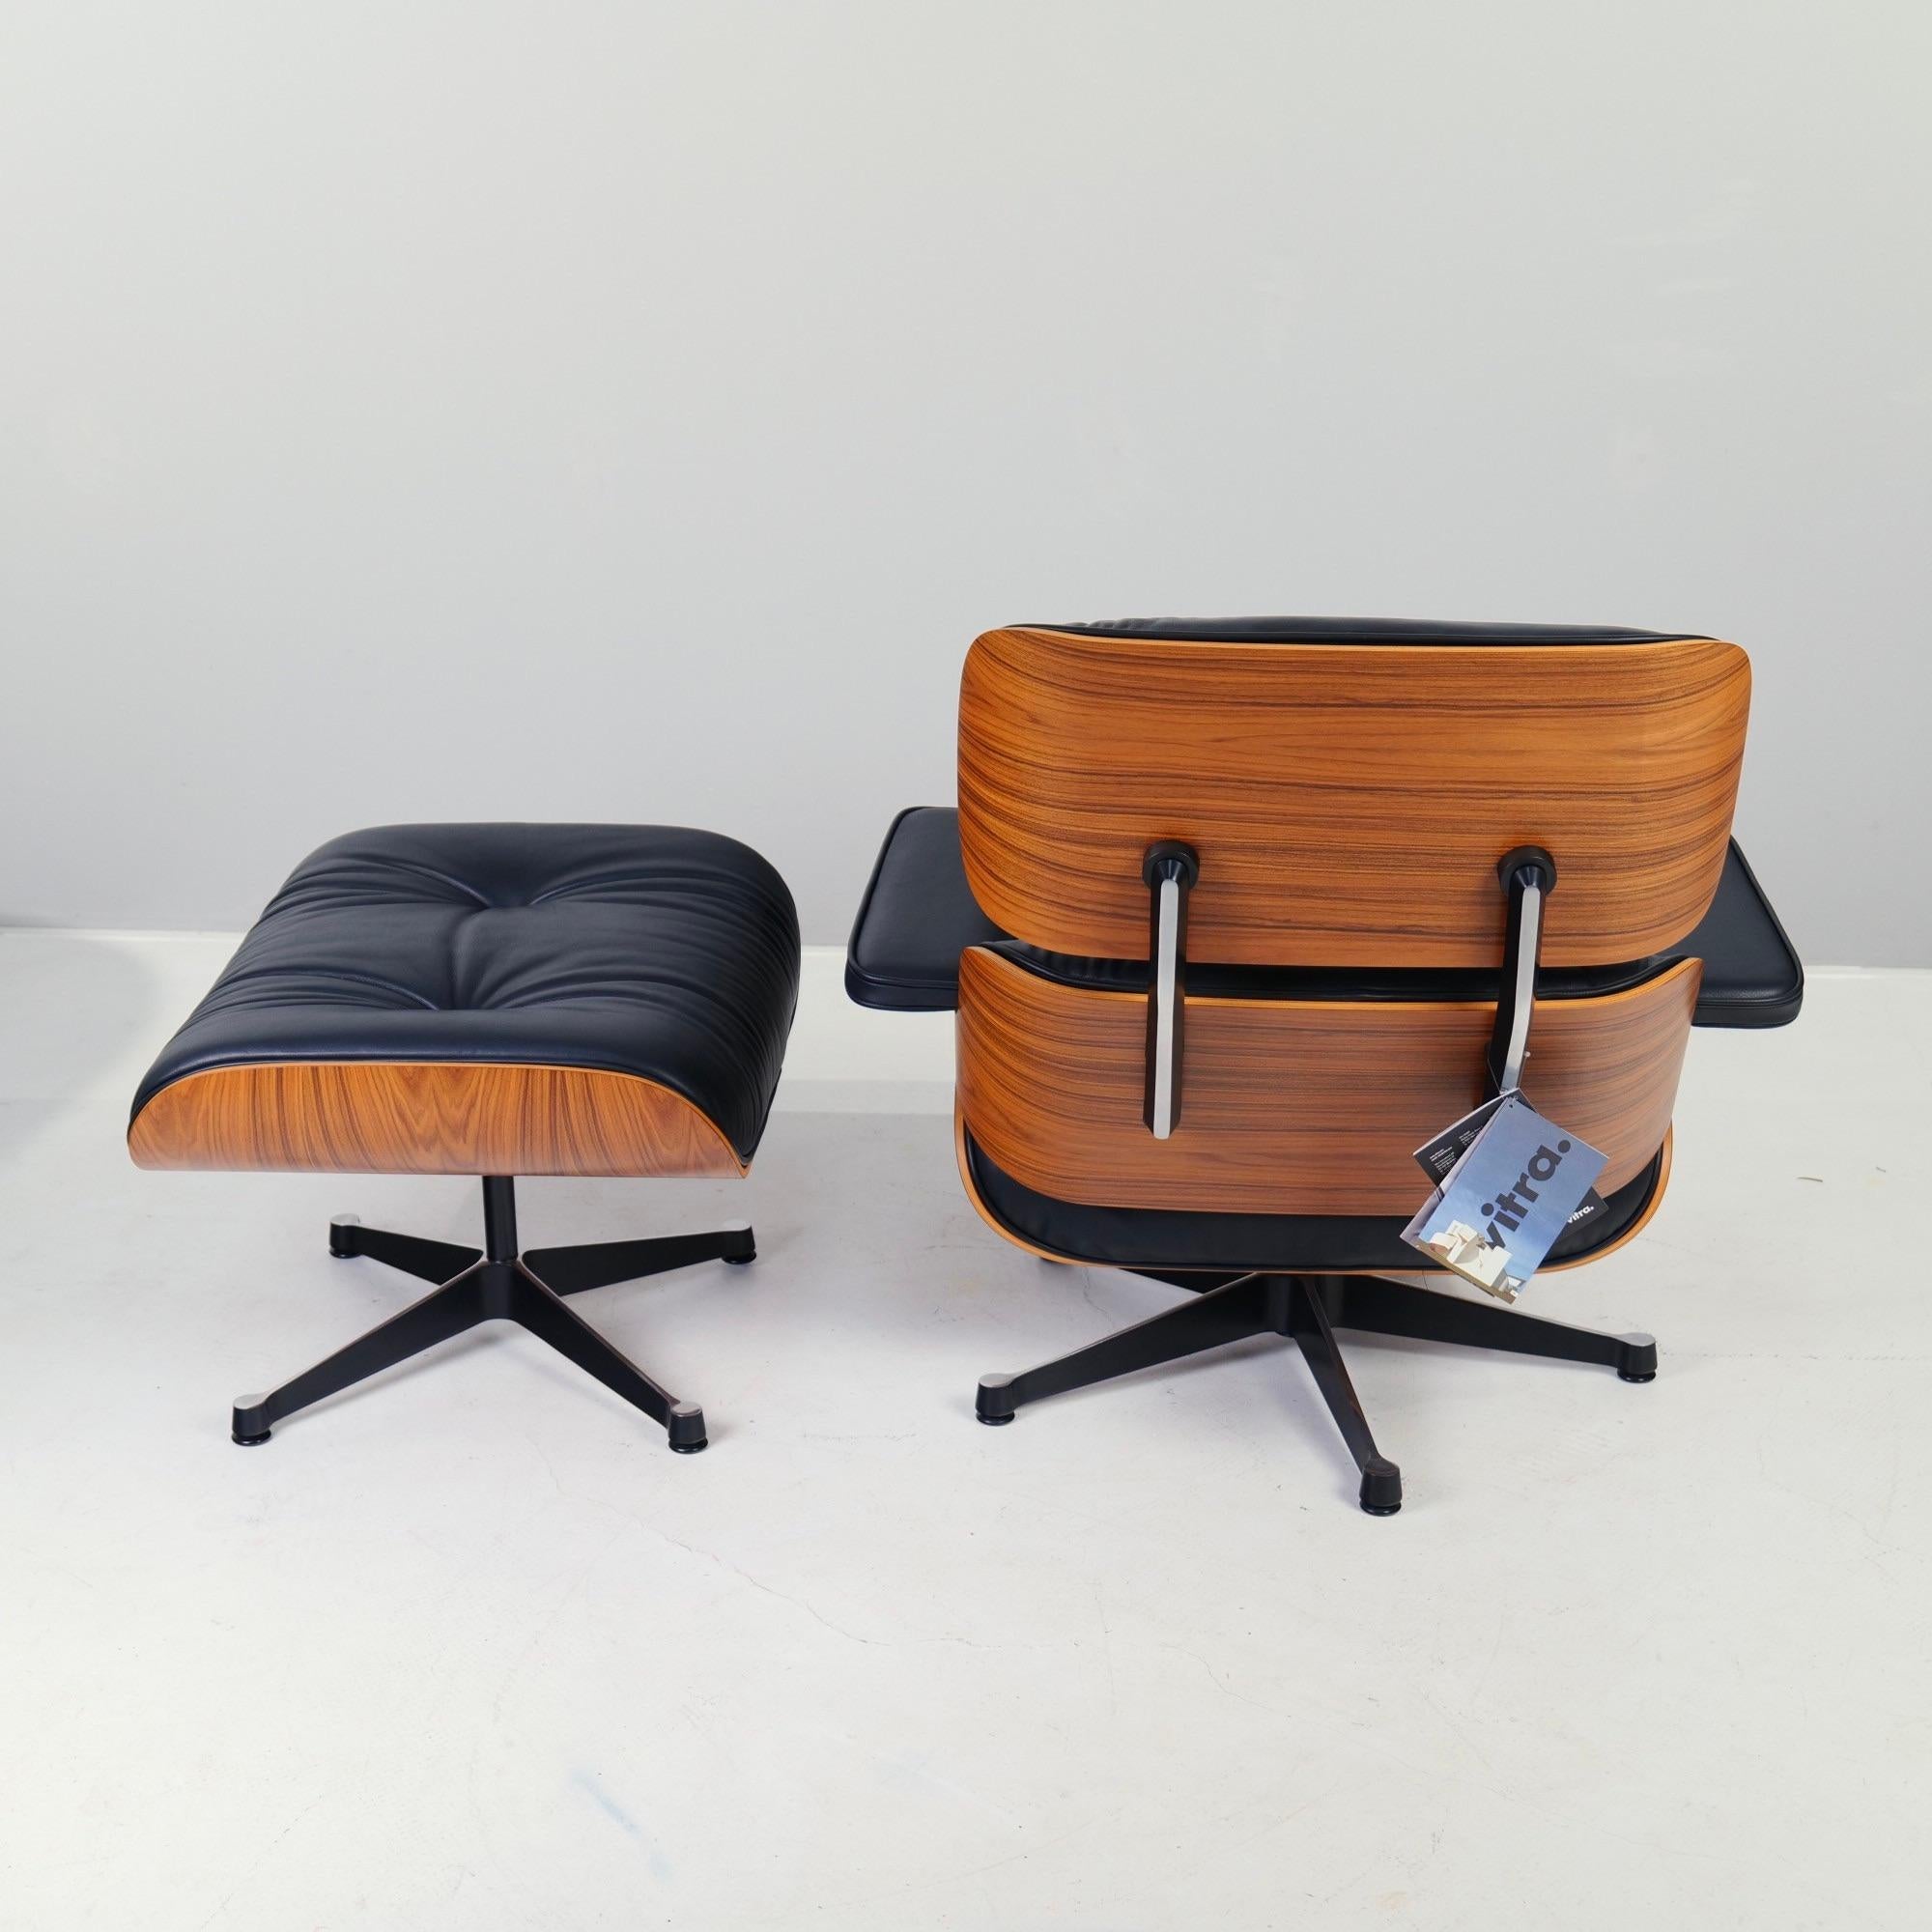 German 50s Anniversary Edition No. 000/999 Eames Lounge Chair, Vitra by Herman Miller